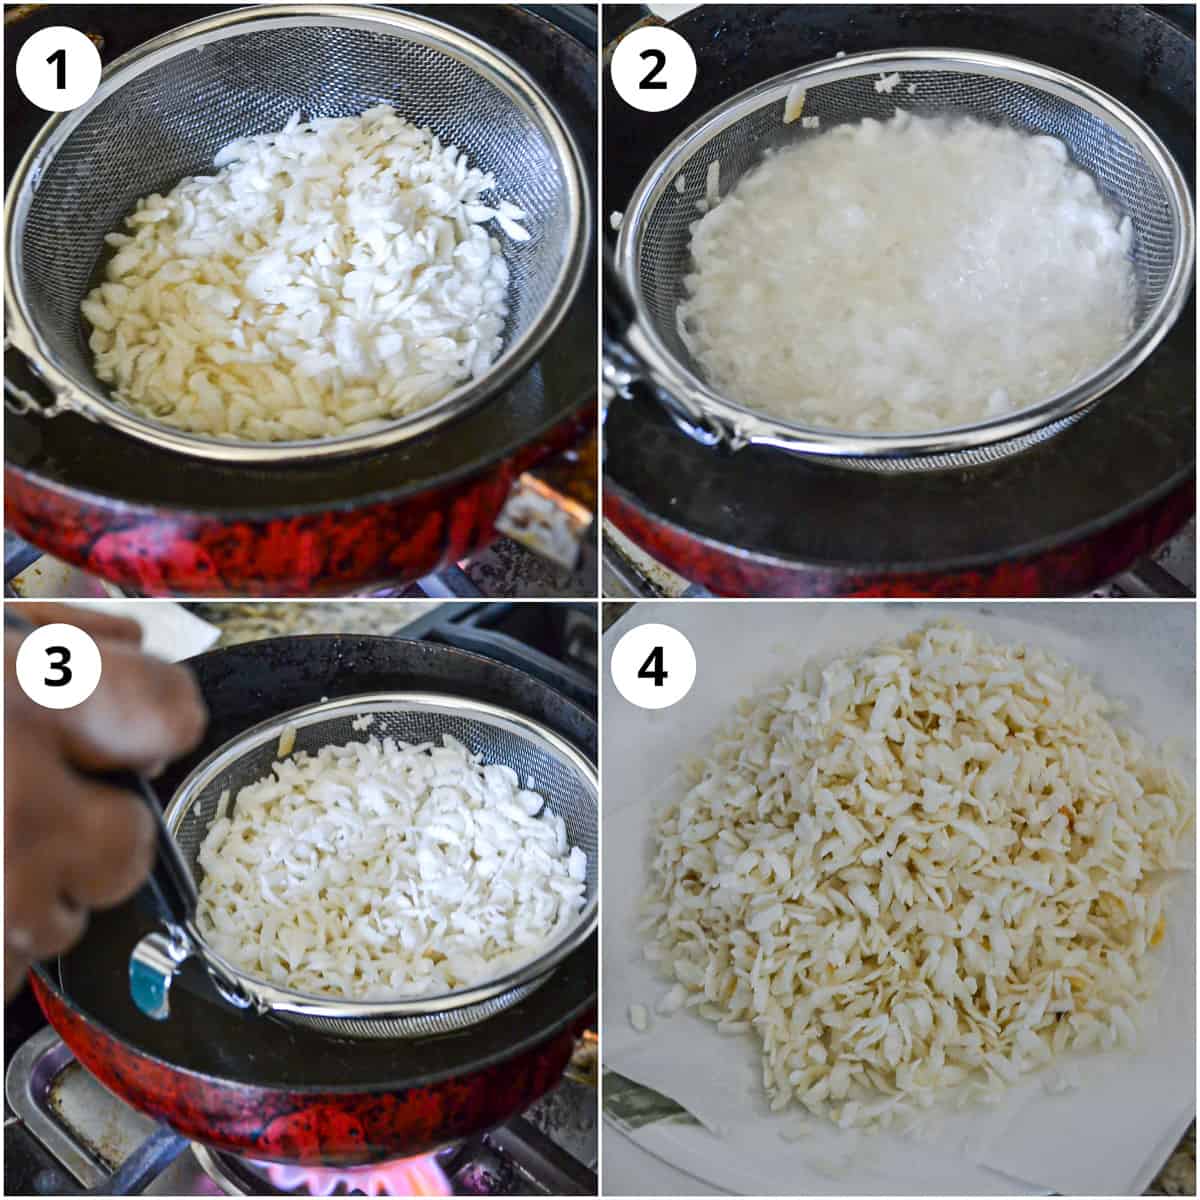 Steps for frying poha using sieve, draining and keeping it on plate